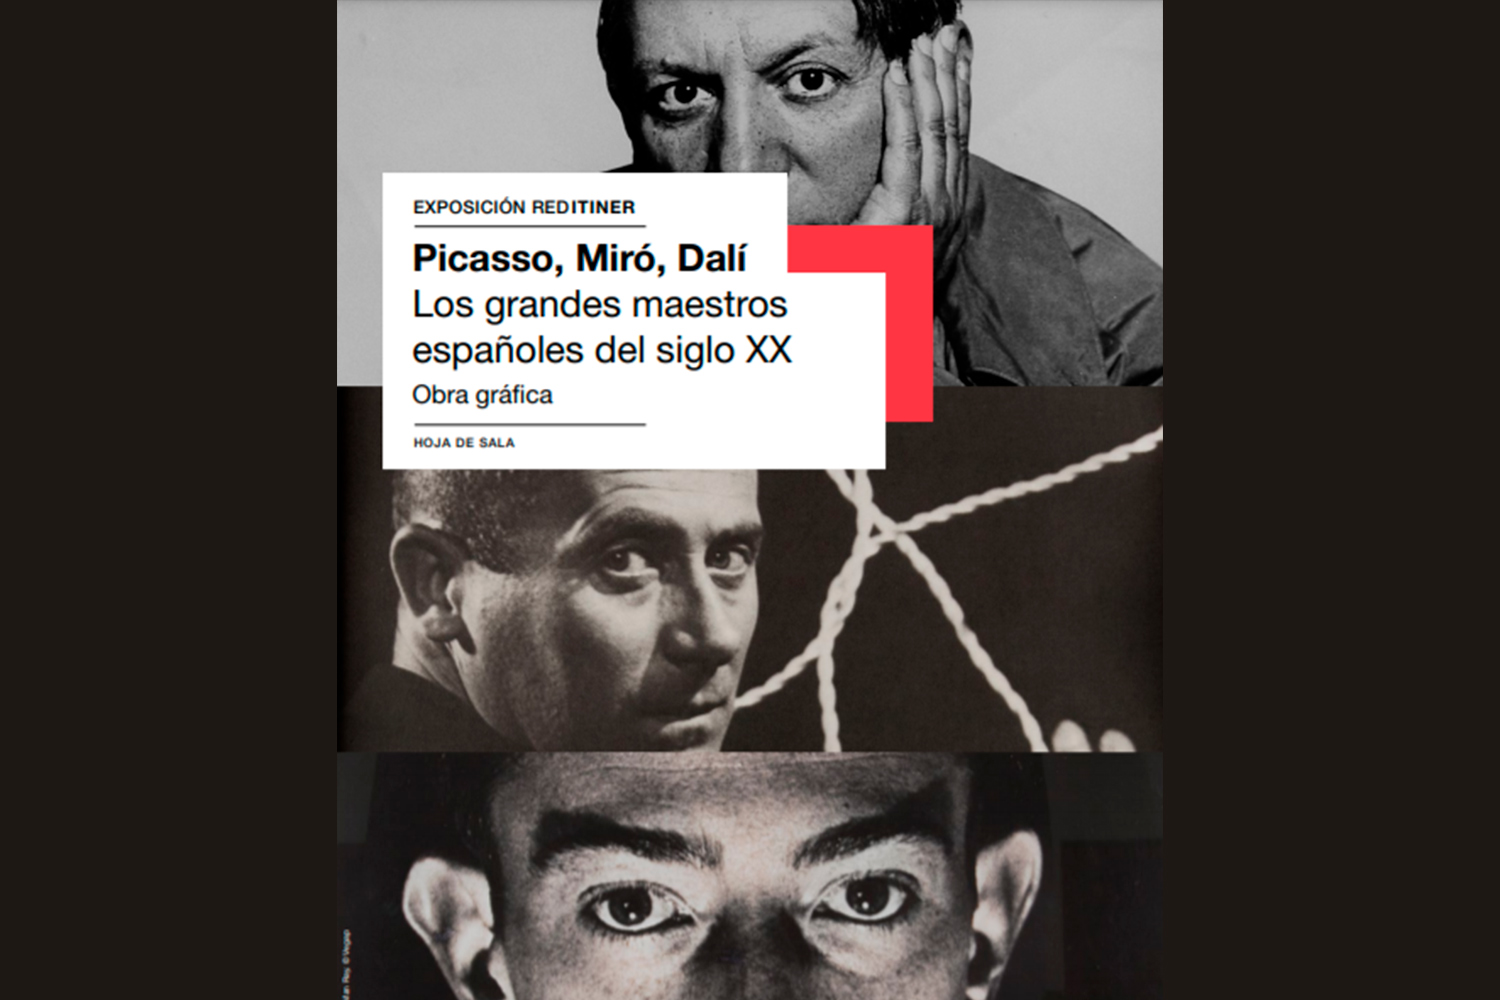 Exhibition "Picasso, Miró, Dalí. Great masters of the 20th century" poster